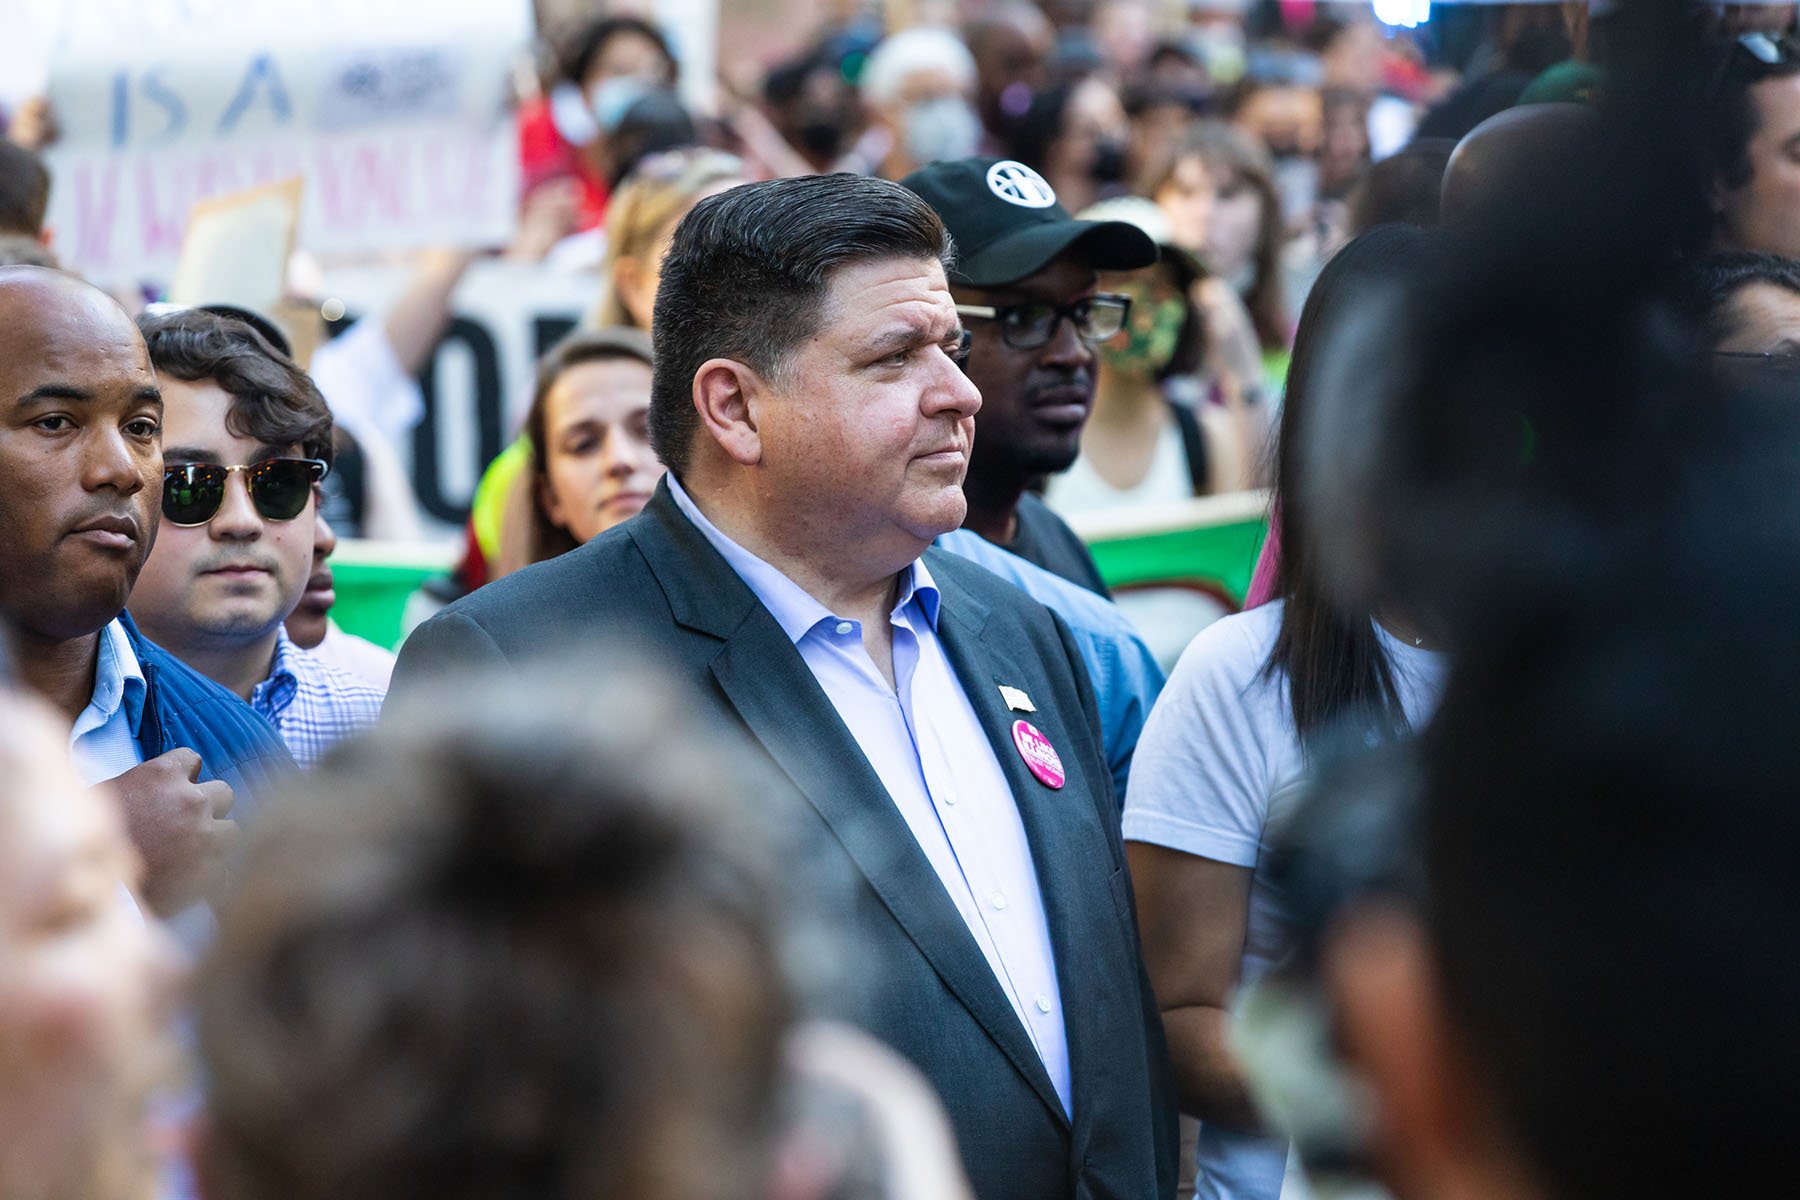 Gov. J.B. Pritzker marches with protesters during an abortion rights rally in Chicago.